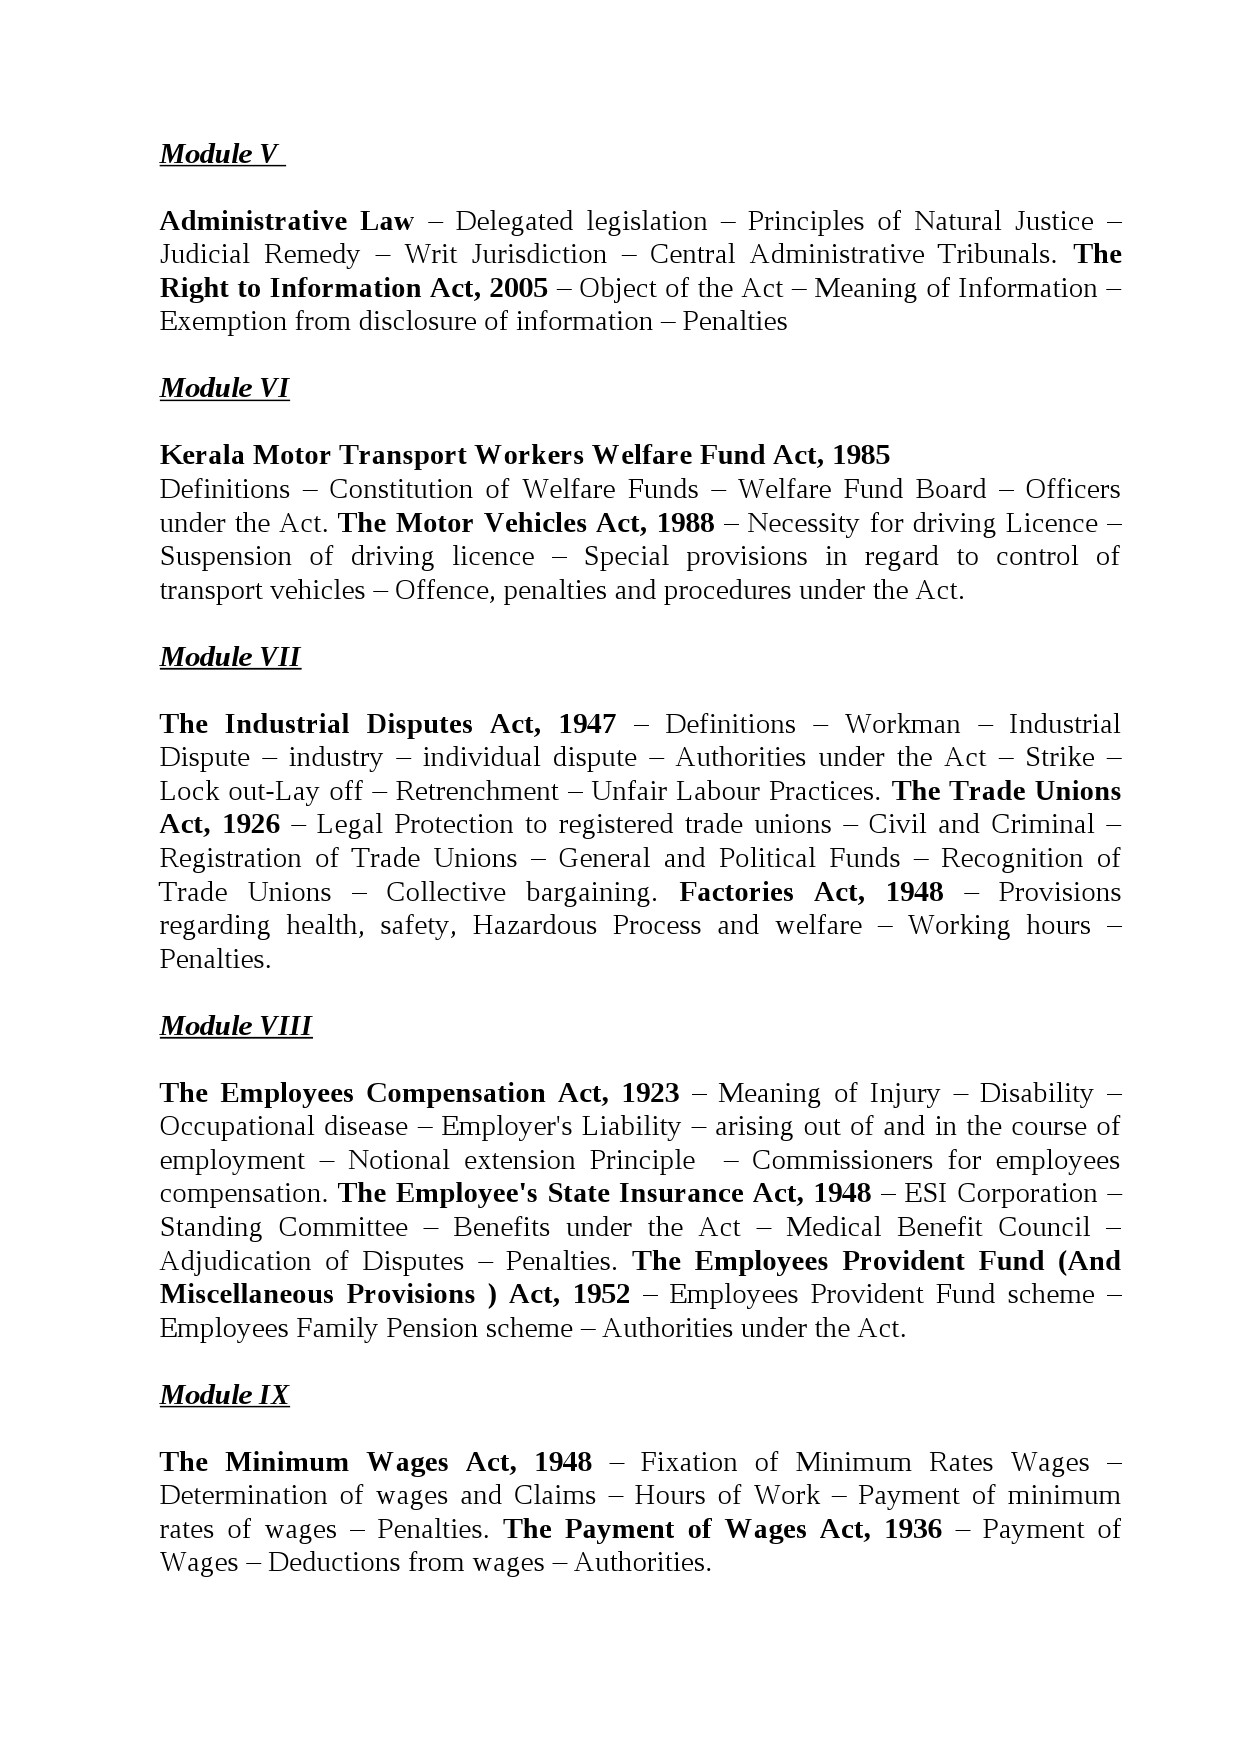 Syllabus for Exams with LLB as Qualification - Notification Image 14